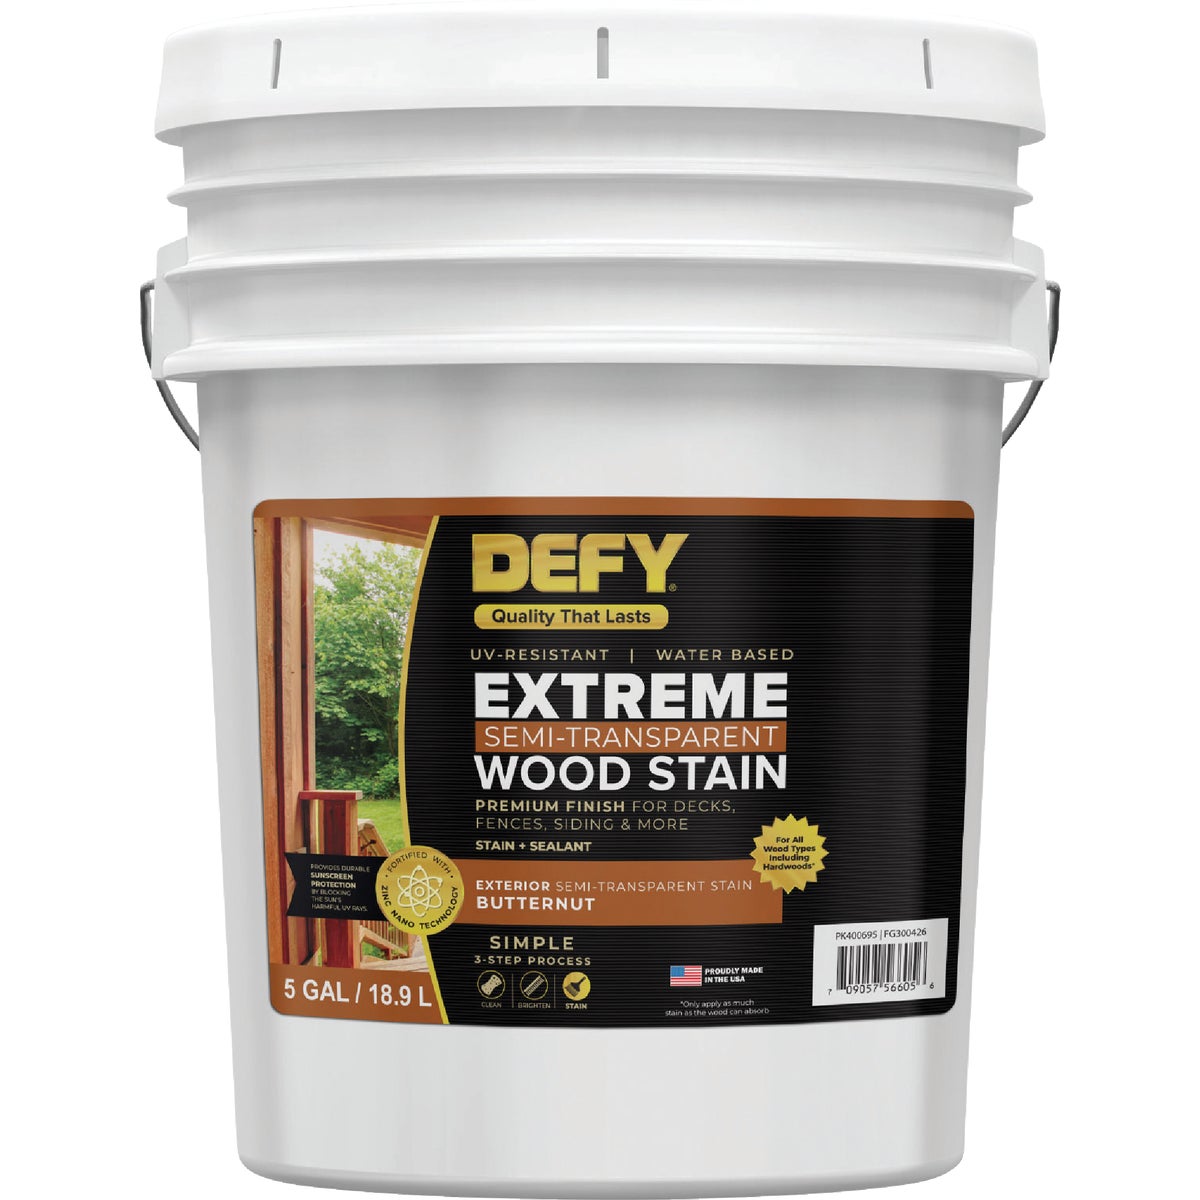 DEFY Extreme Semi-Transparent Exterior Wood Stain, Butternut, 5 Gal.